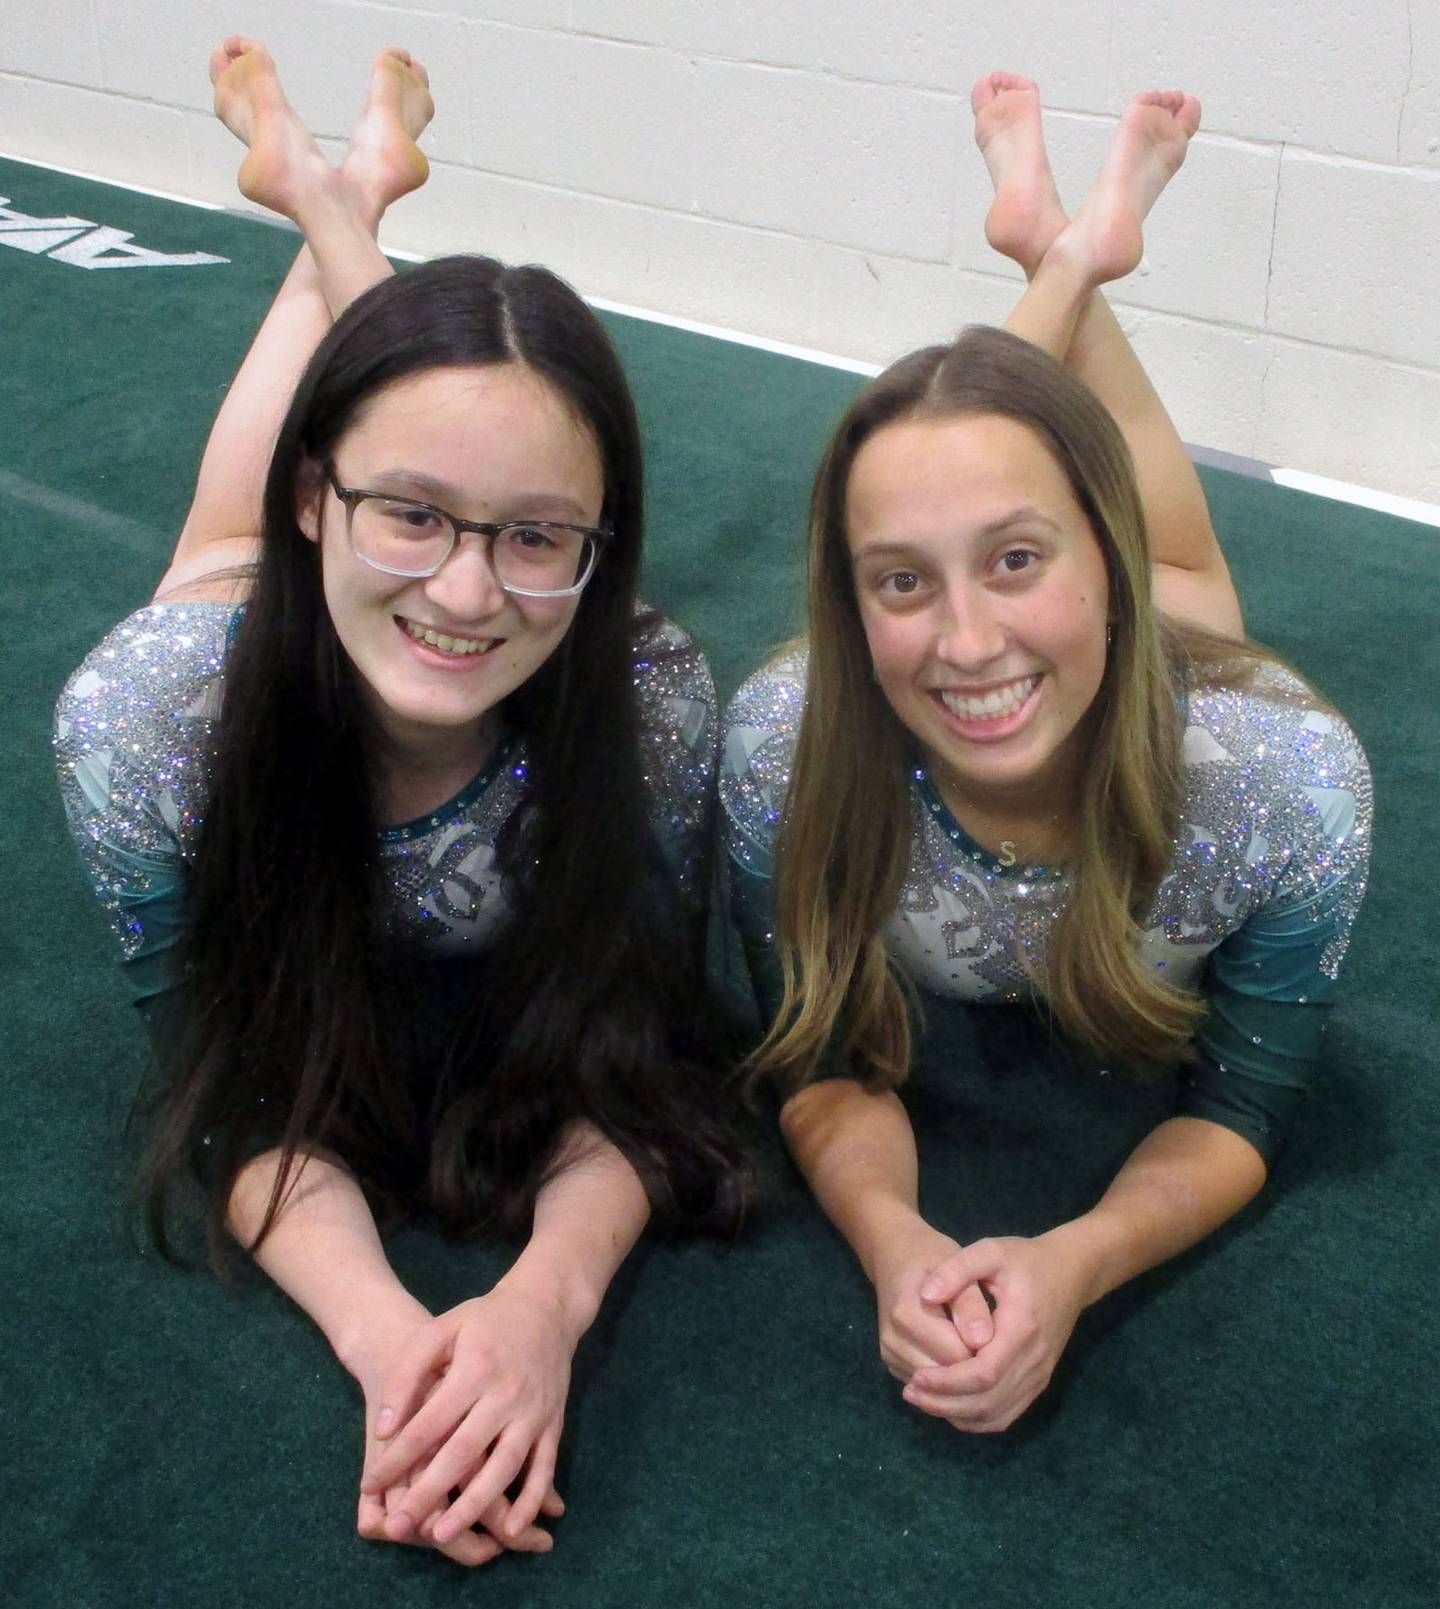 Seniors Sammy Hopper and Skylar Oh, who both reached the 2022 state gymnastics meet event finals and helped Glenbard West finish fourth as a team, are back to lead the Hilltoppers this season.